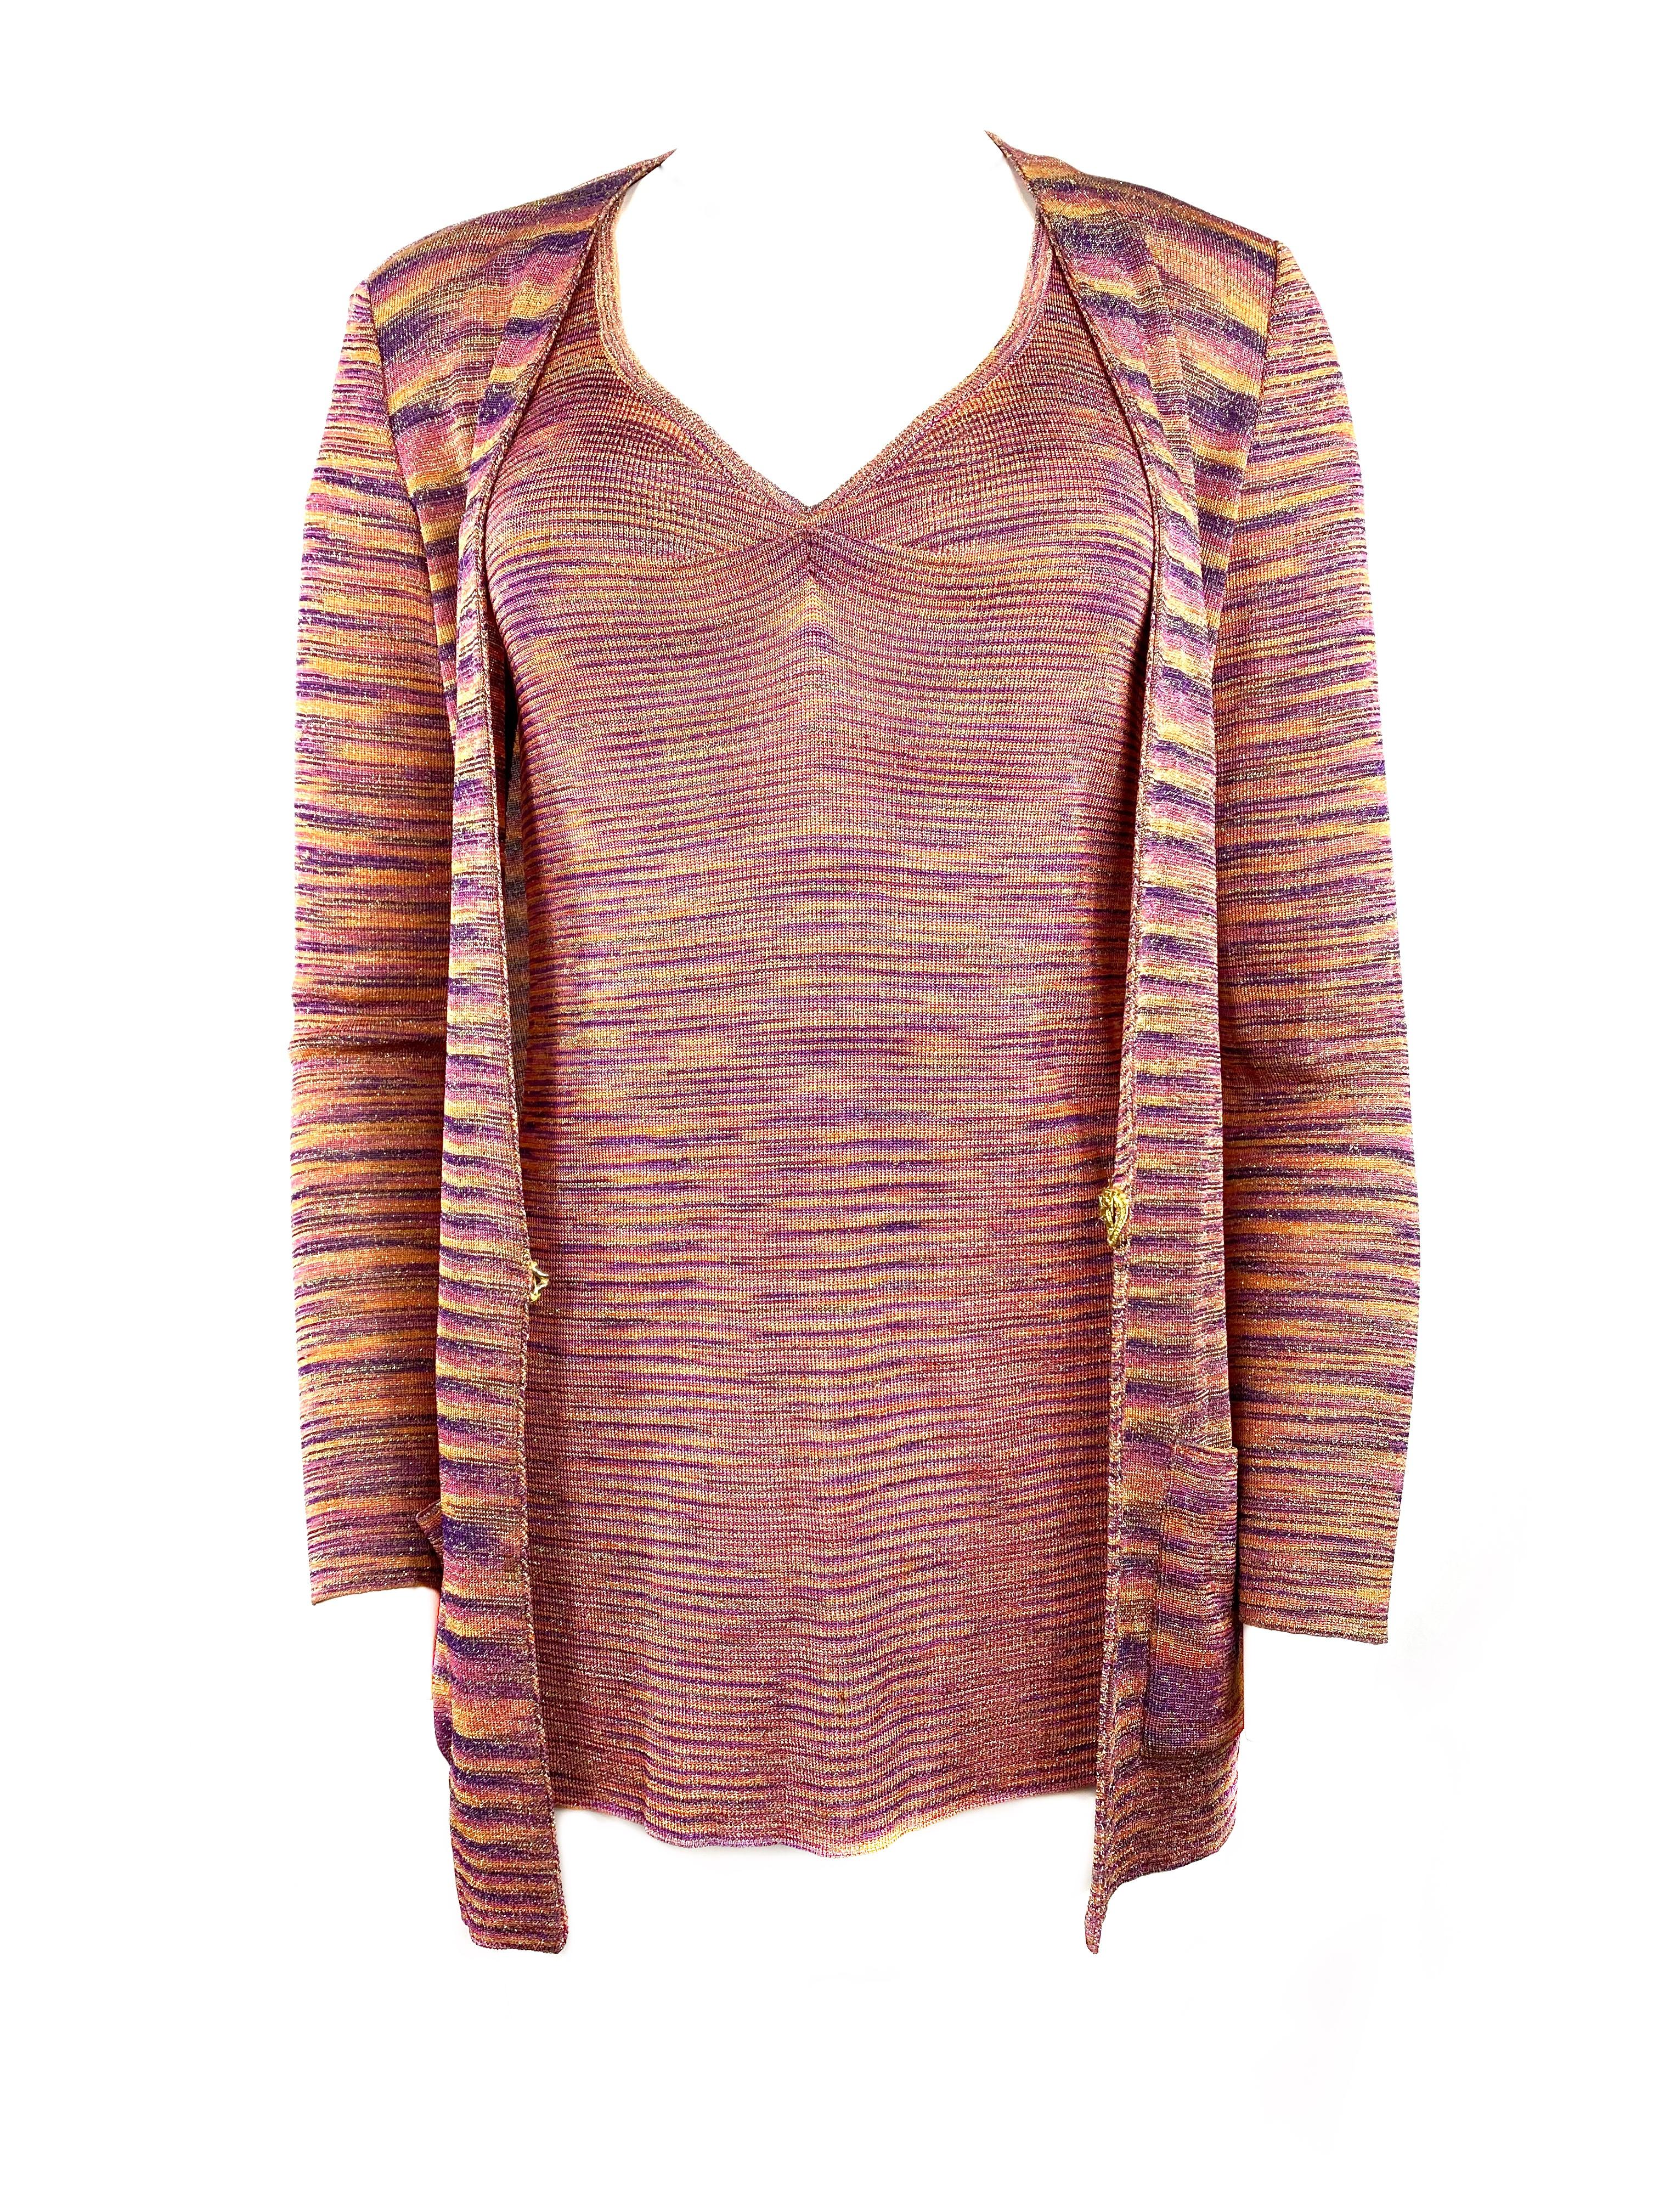 Missoni Multicolor Knit Sleeveless Top and Cardigan Set Size 40 For Sale 1